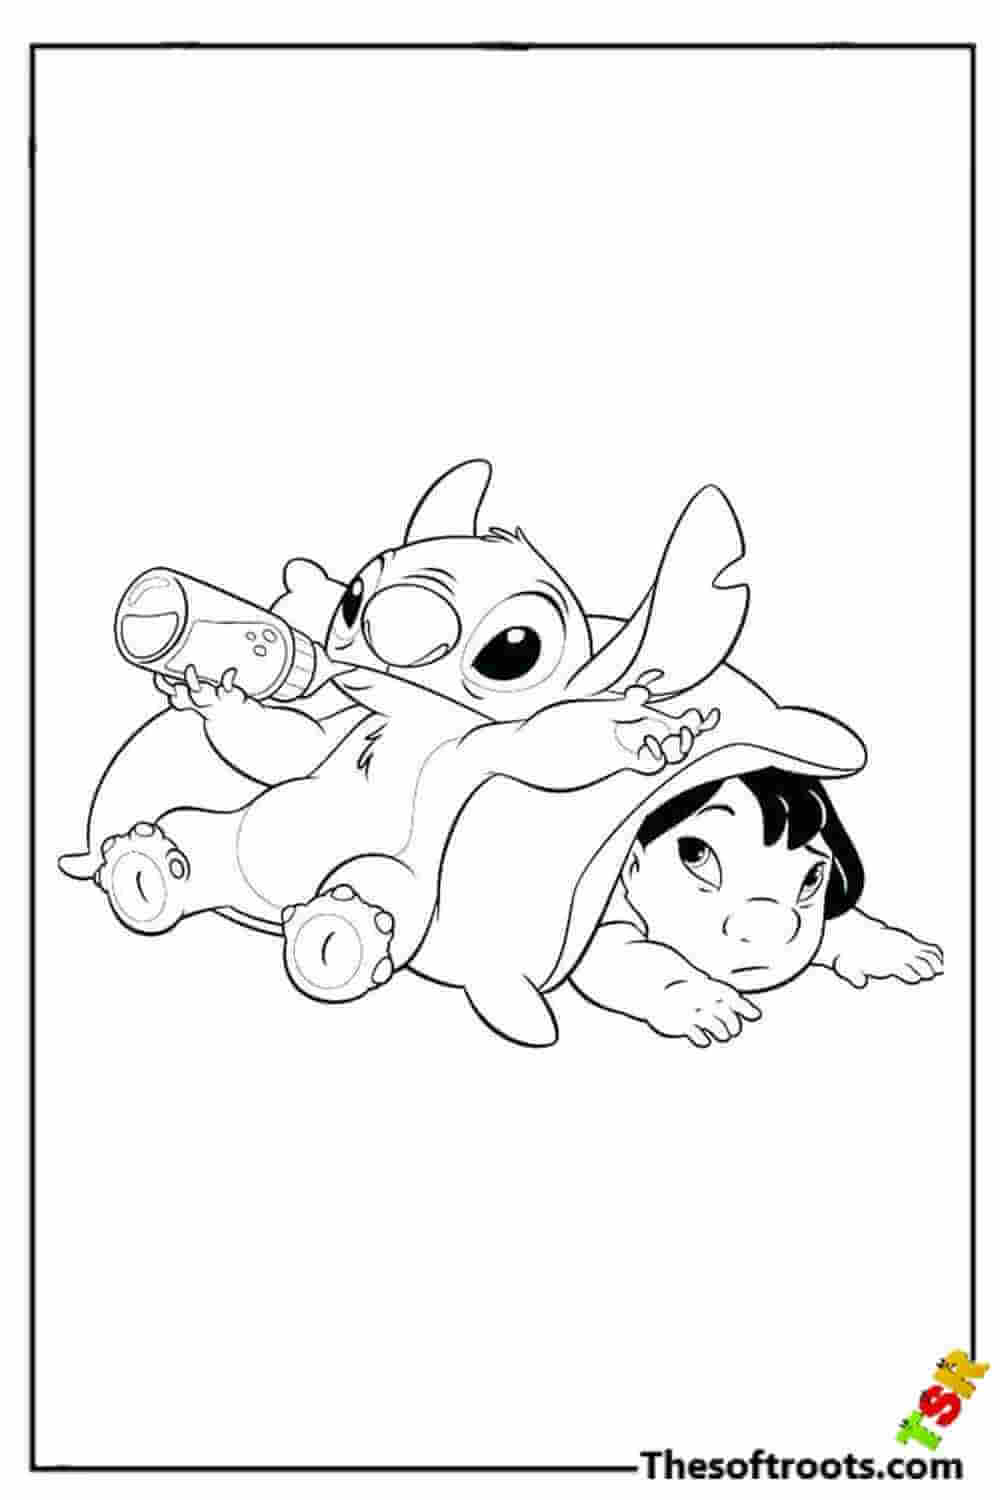 Adorable Lilo and Stitch coloring pages